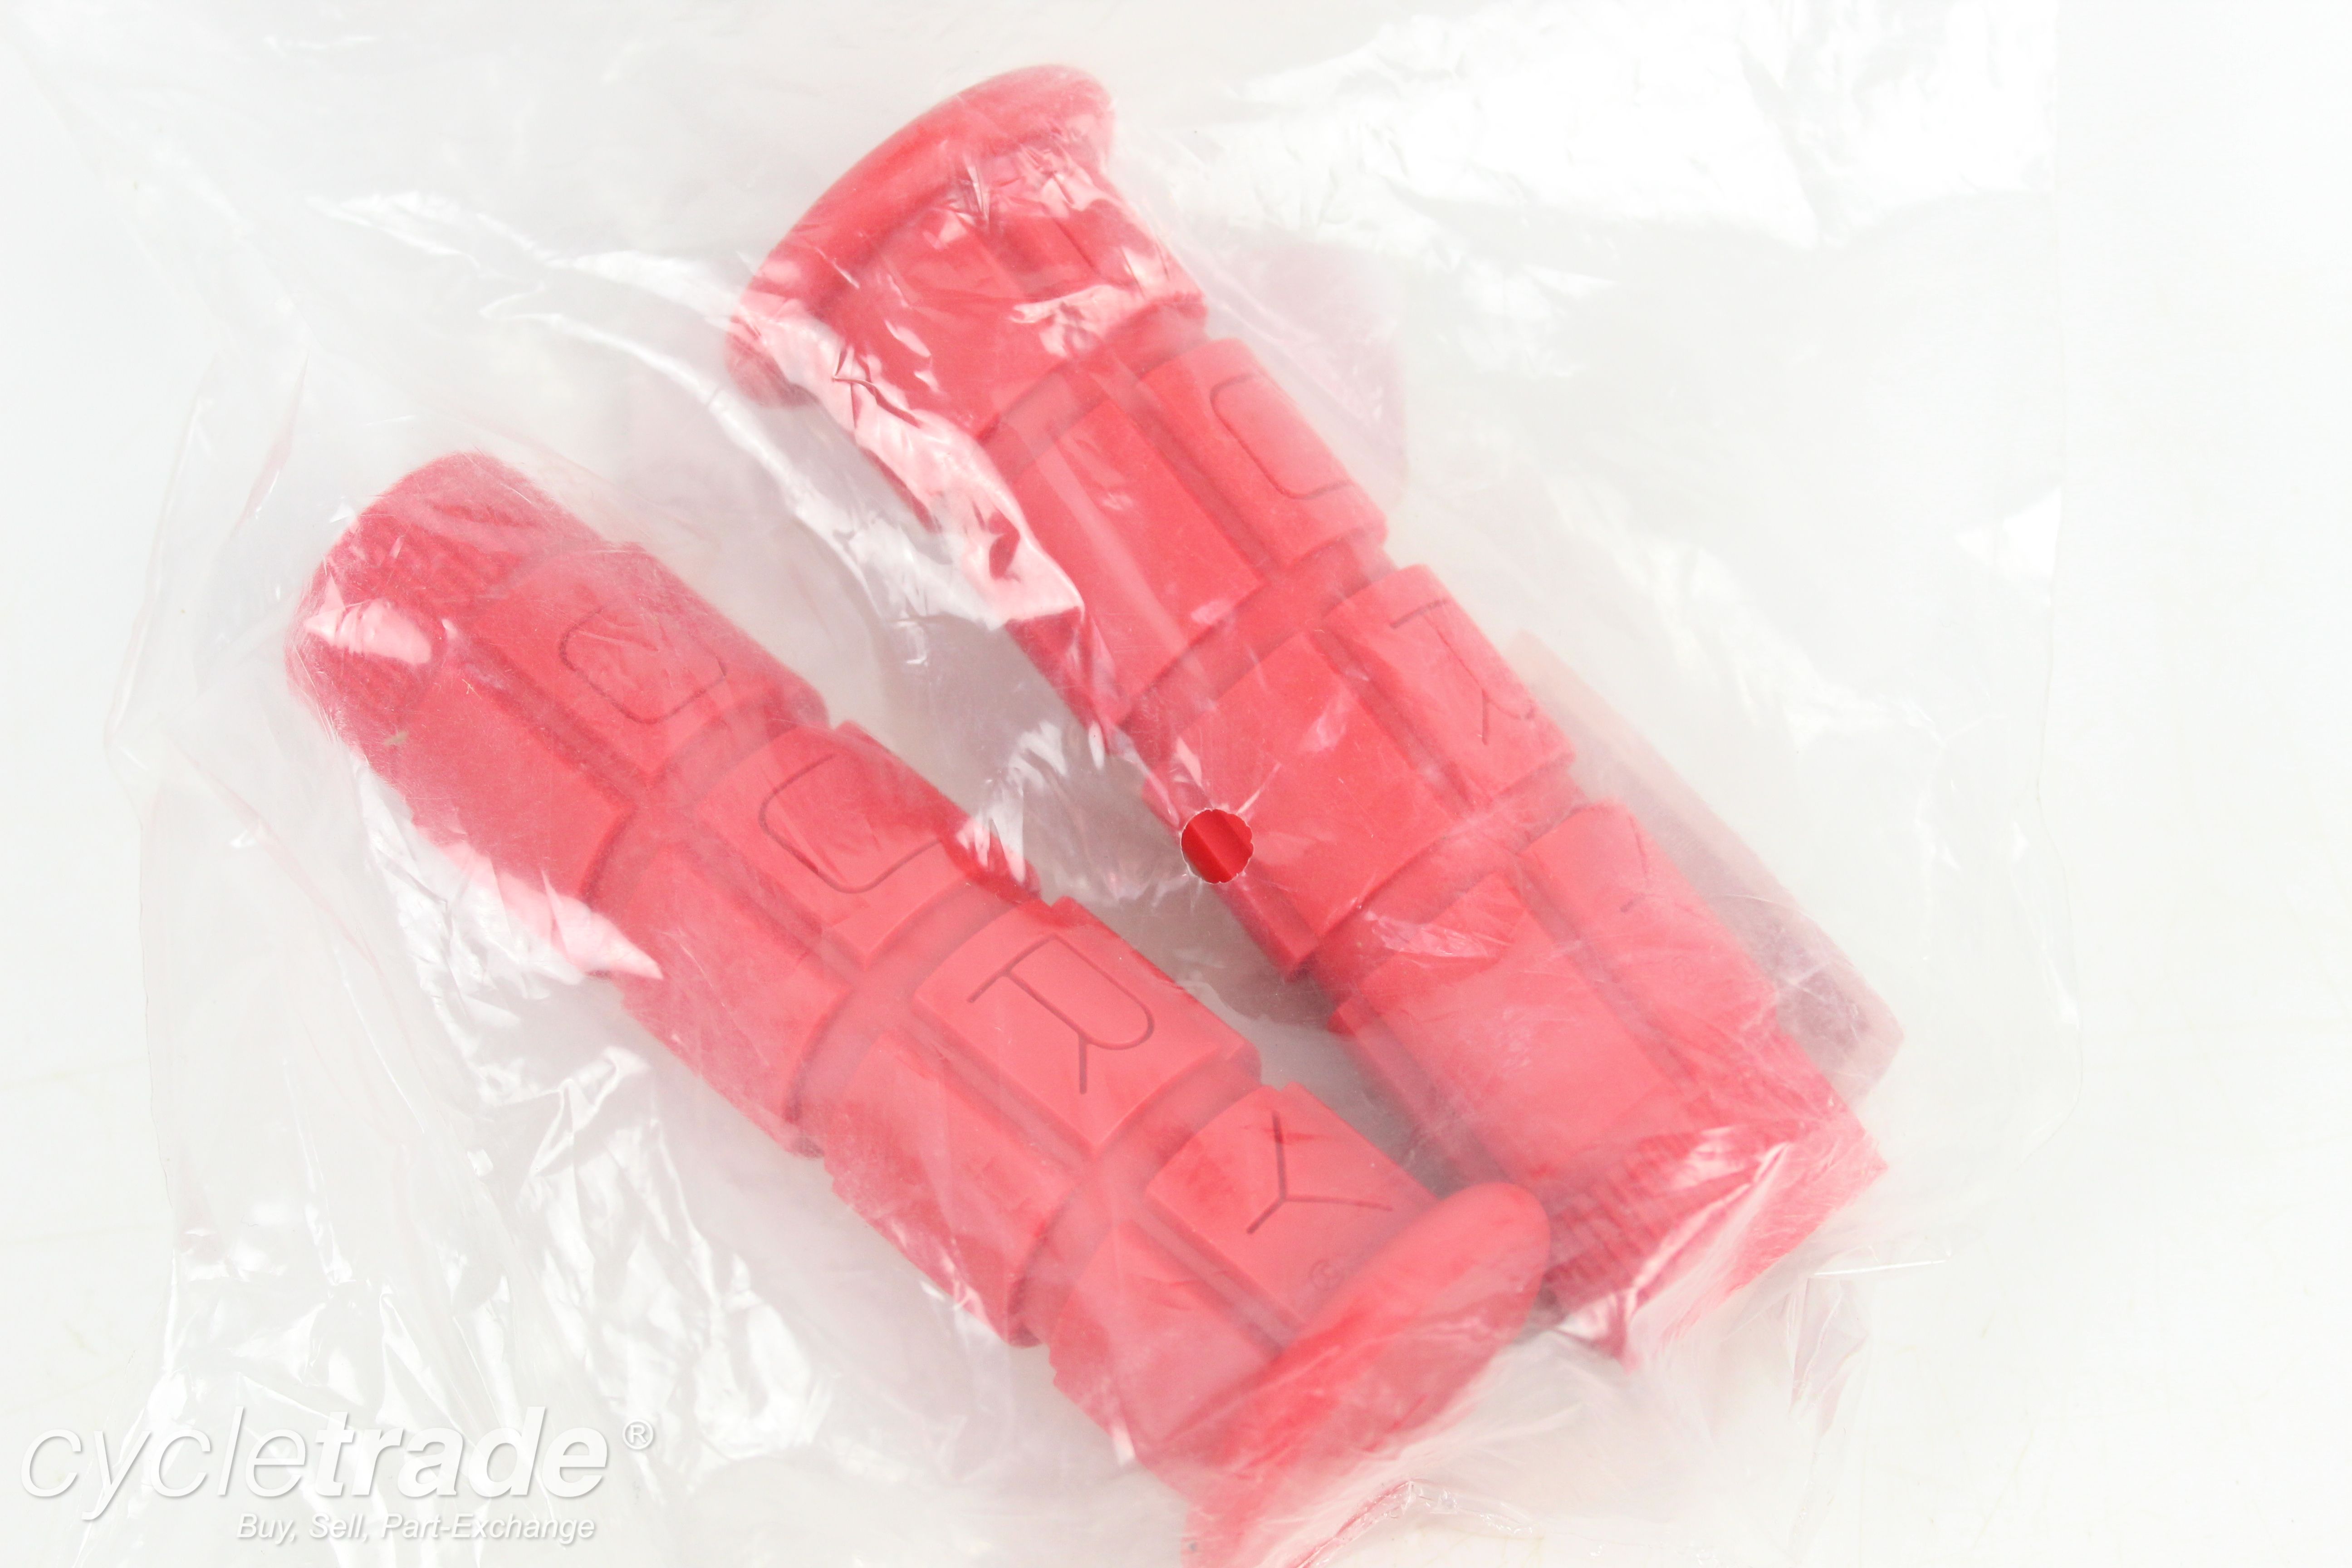 MTB/Hybrid Grips - Odi Oury Push-On, 120mm (Red) - Grade A+ (New)